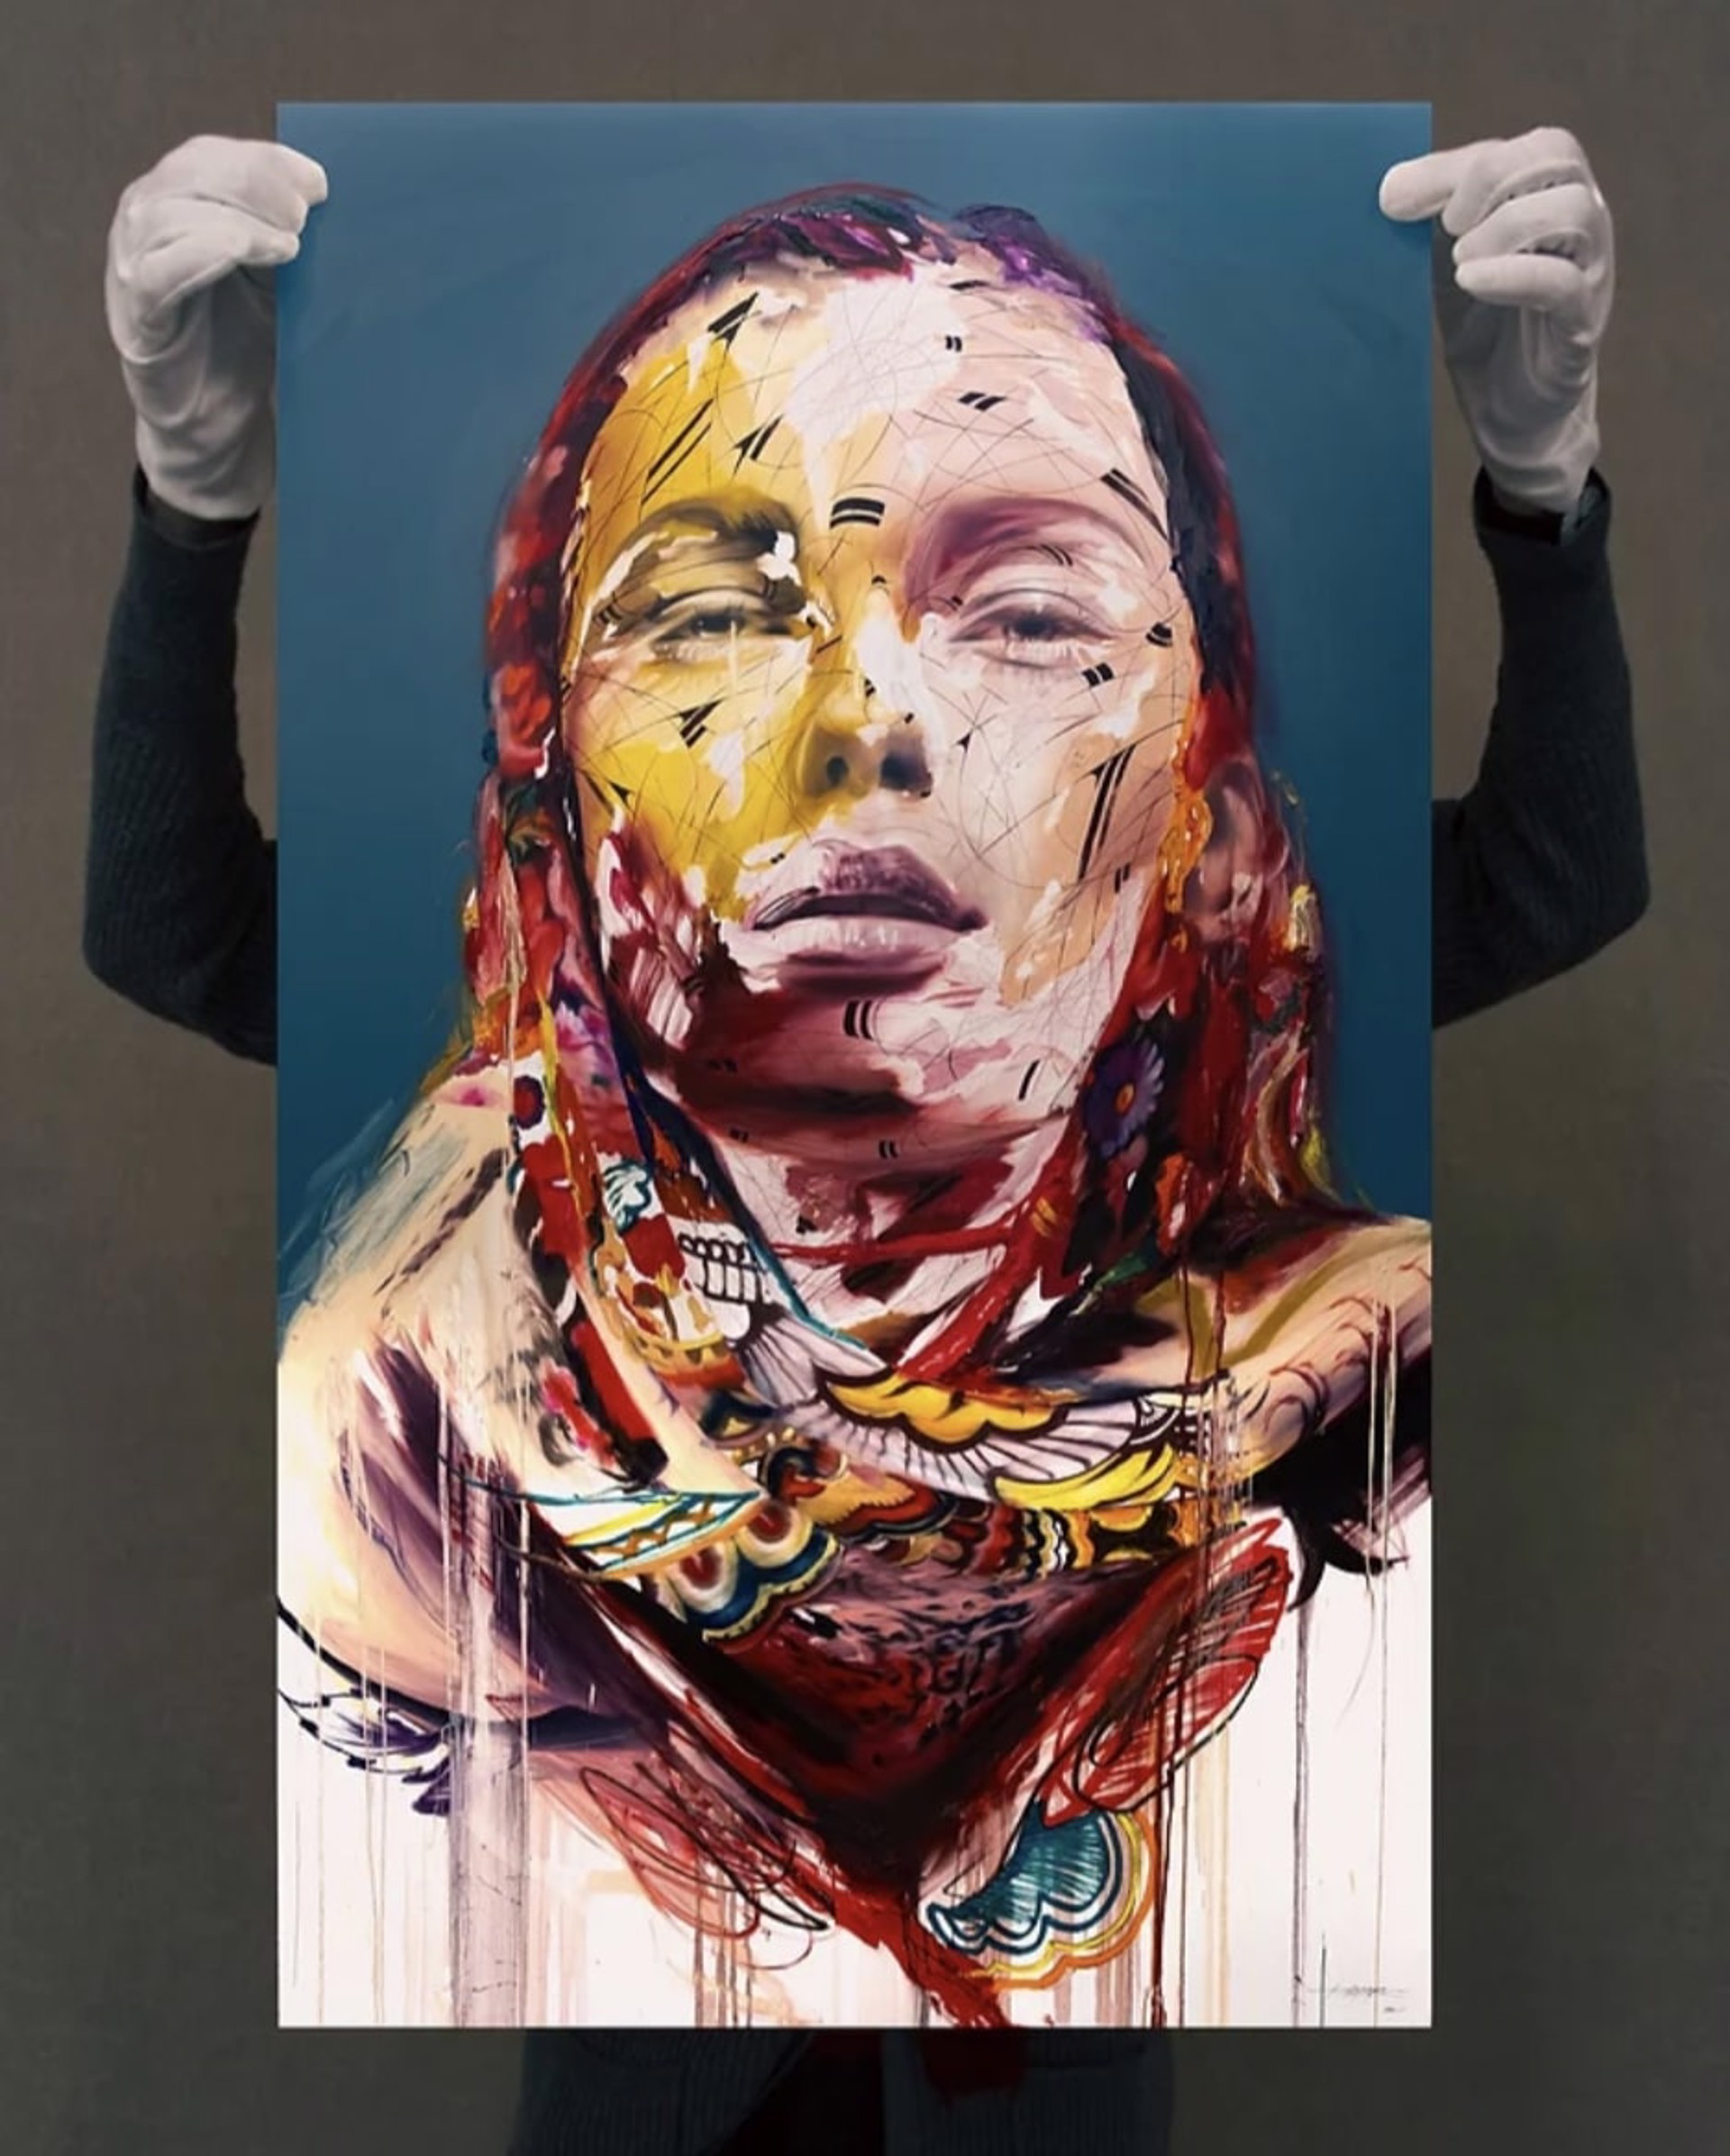 Heritage by Hopare (Alexandre Monteiro)